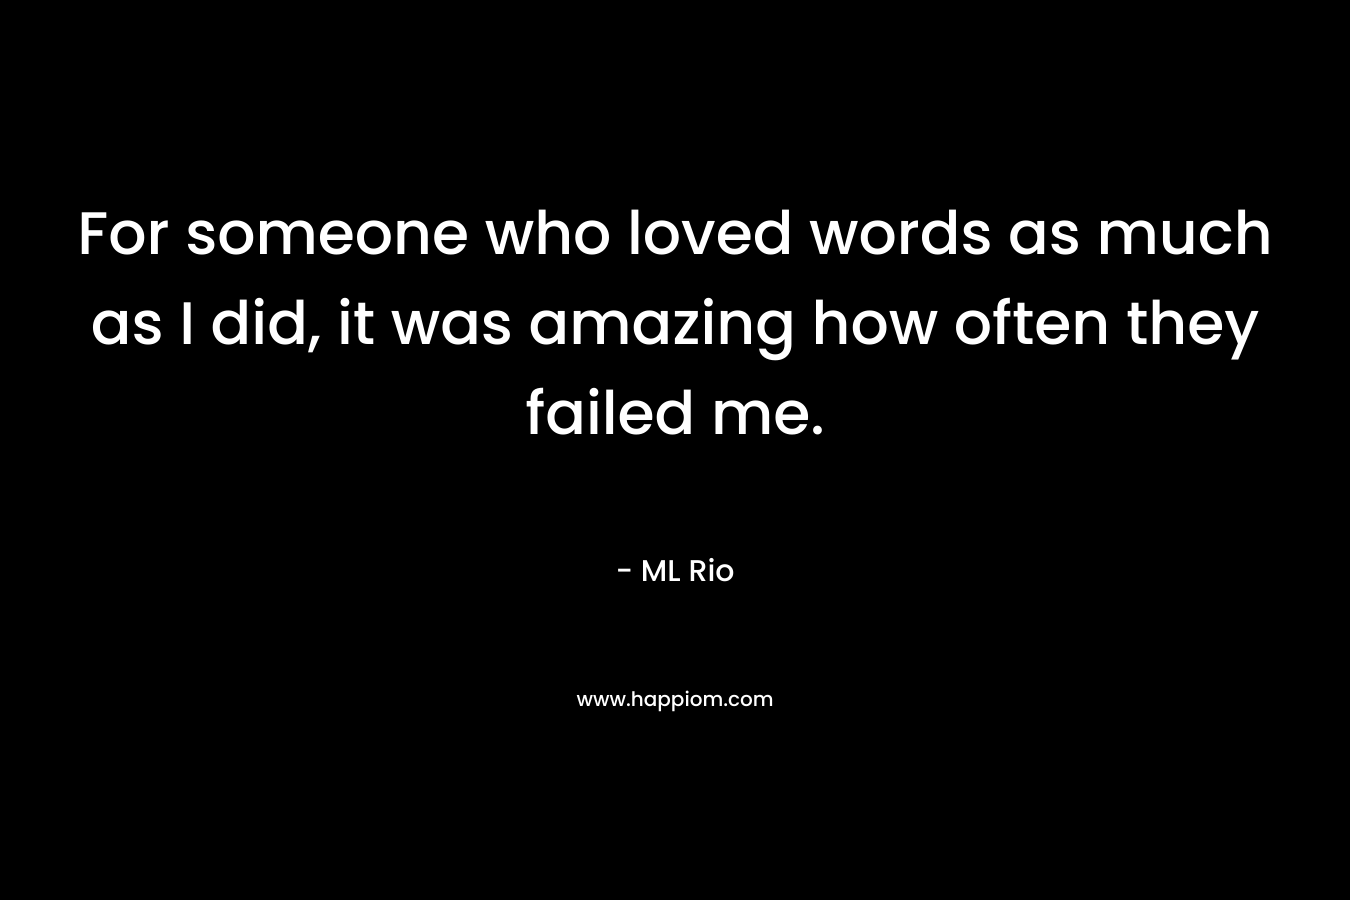 For someone who loved words as much as I did, it was amazing how often they failed me.